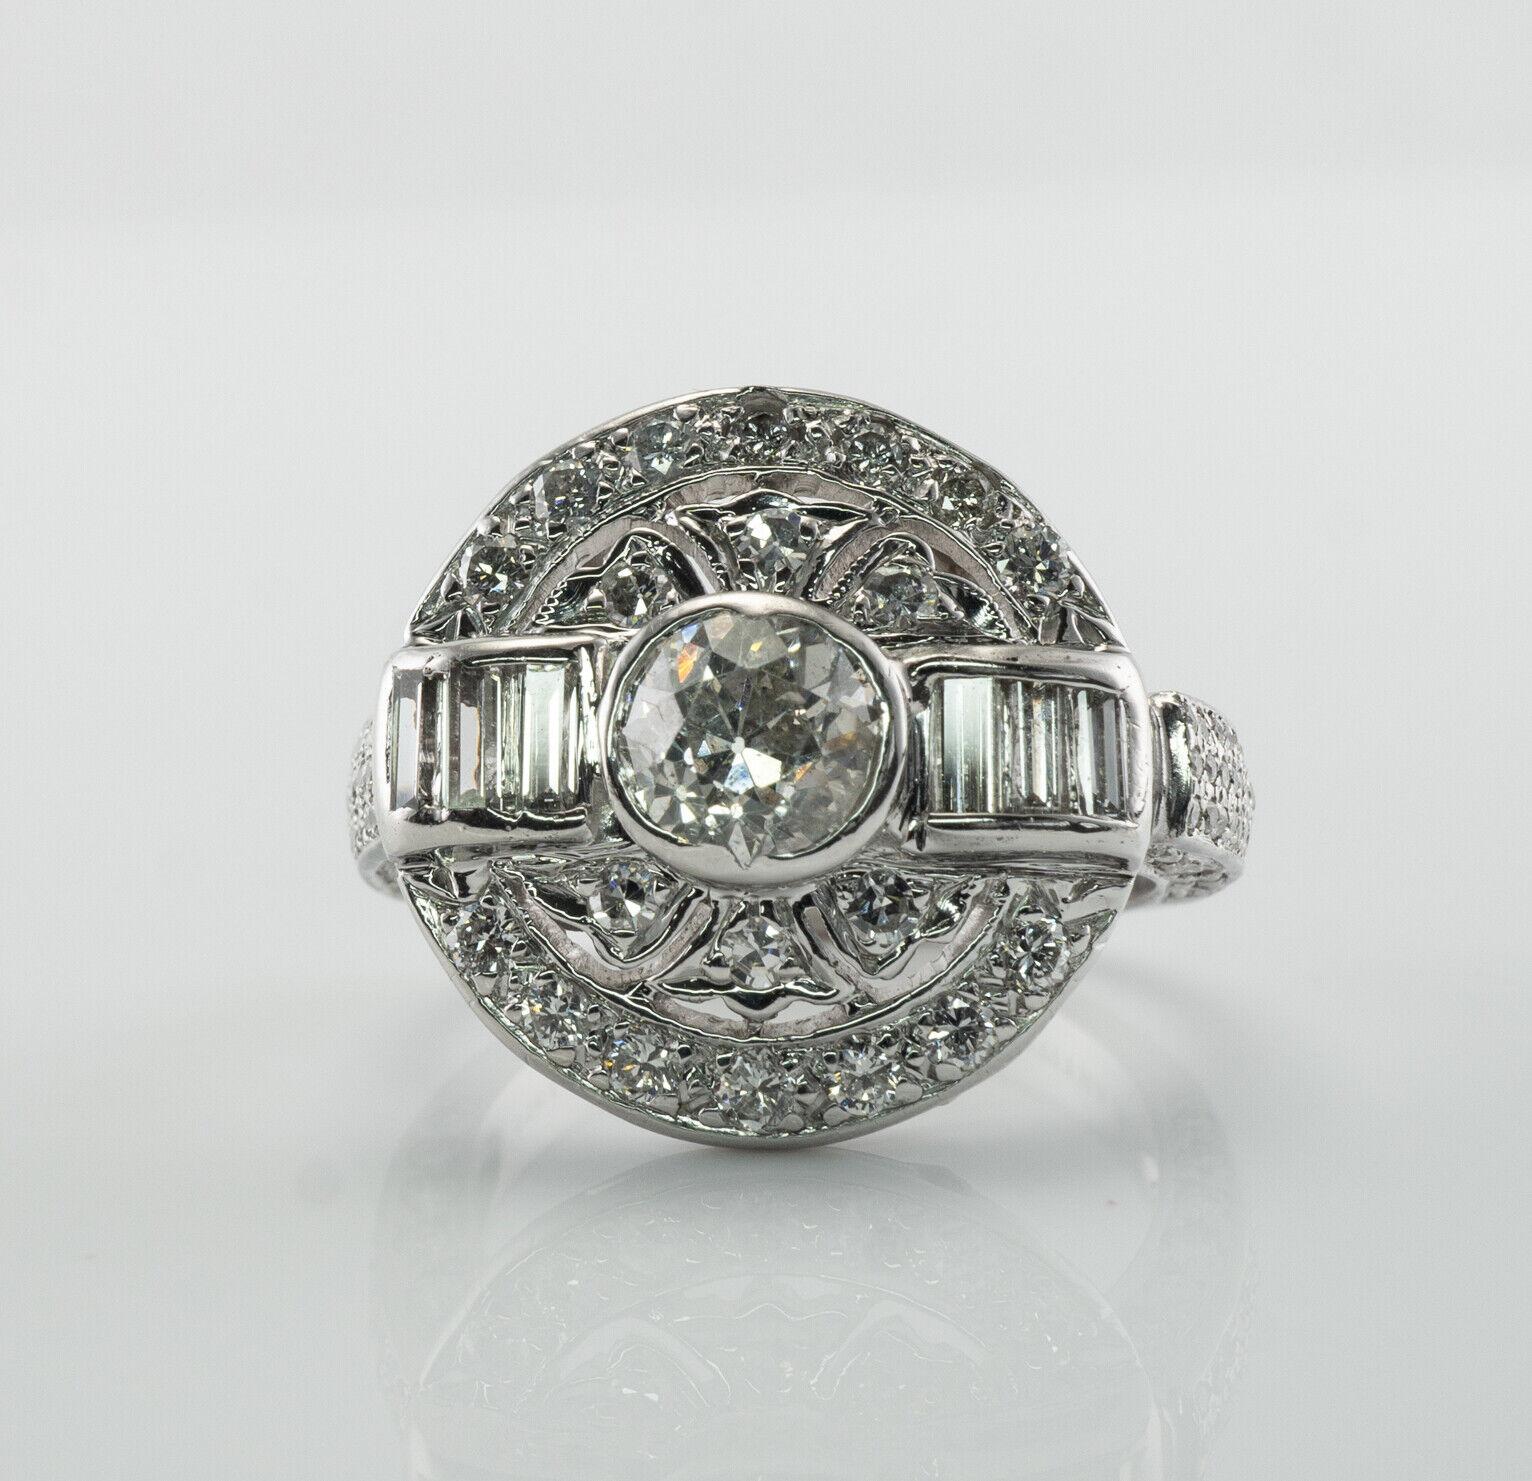 William Goldberg Diamond Ring Vintage Platinum 2.83 TDW

This vintage ring is made by William Goldberg, numbered with R 5806, and stamped Platinum 950. The center Old European cut diamond is .91 carat of I1 clarity and I color. It has a tiny chip on